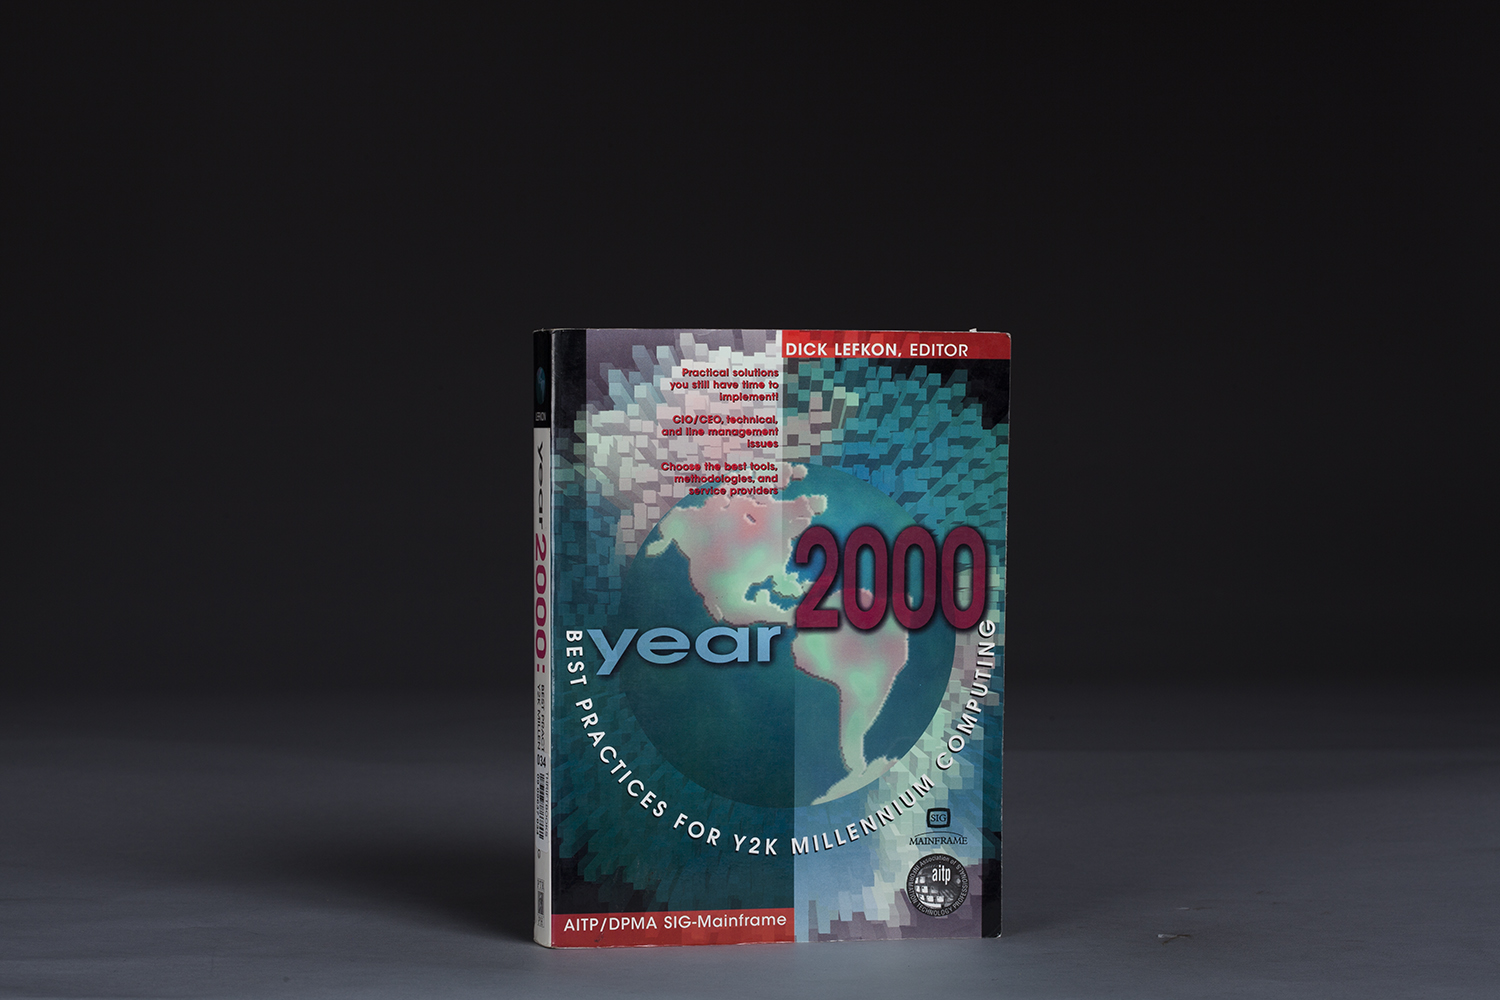 Year 2000 Best Practices for Y2K Millennium Computing - 0995 Cover.jpg